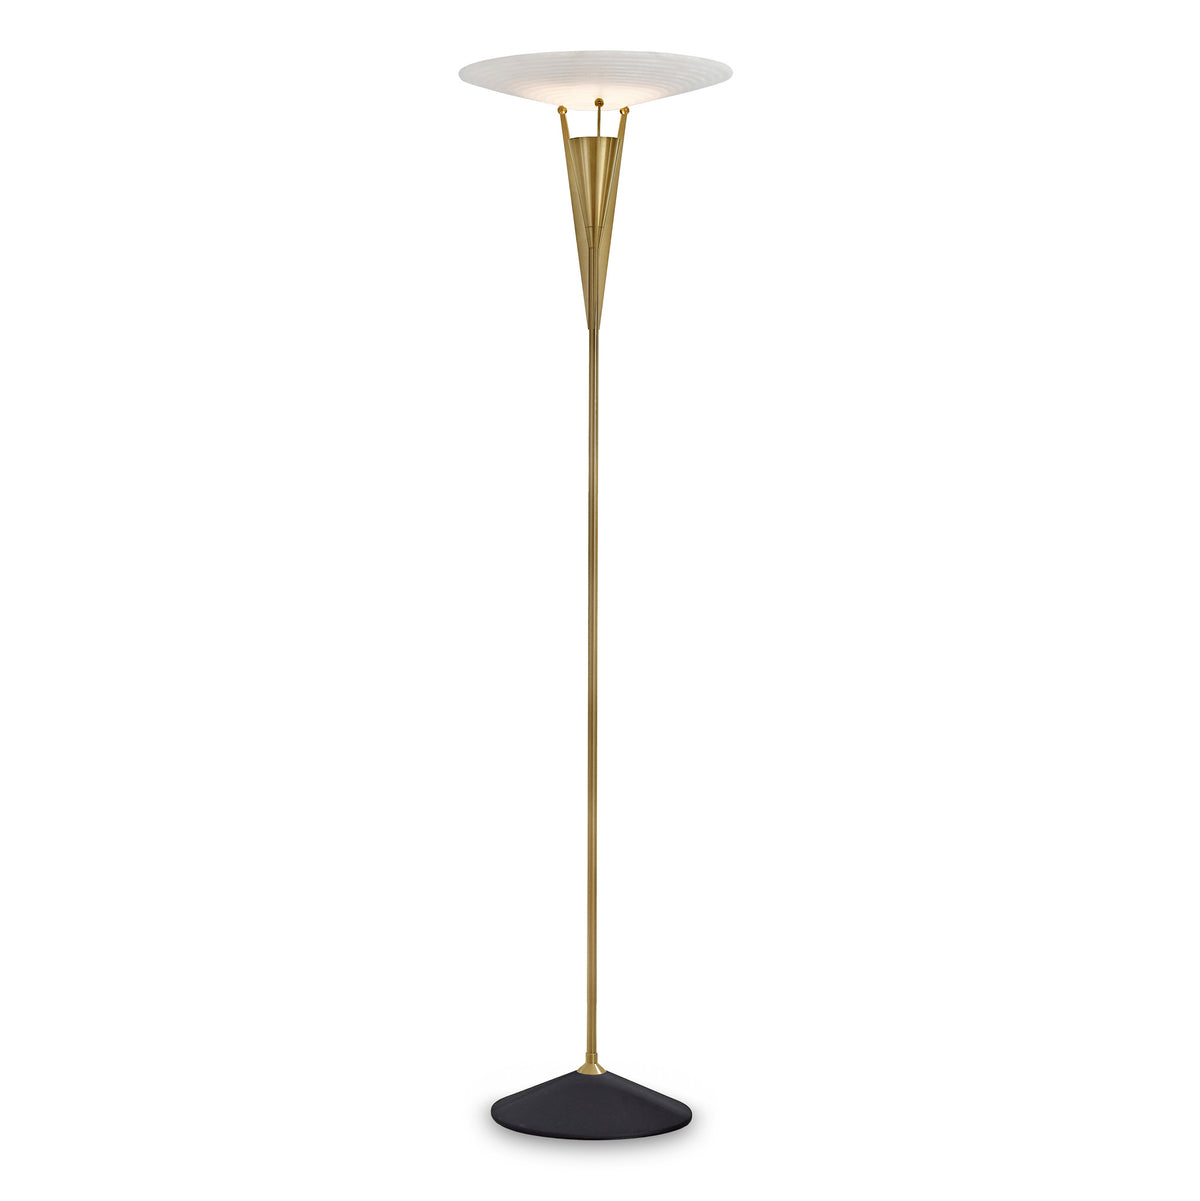 Aragon Floor Light with alabaster stone and antique brass metalwork